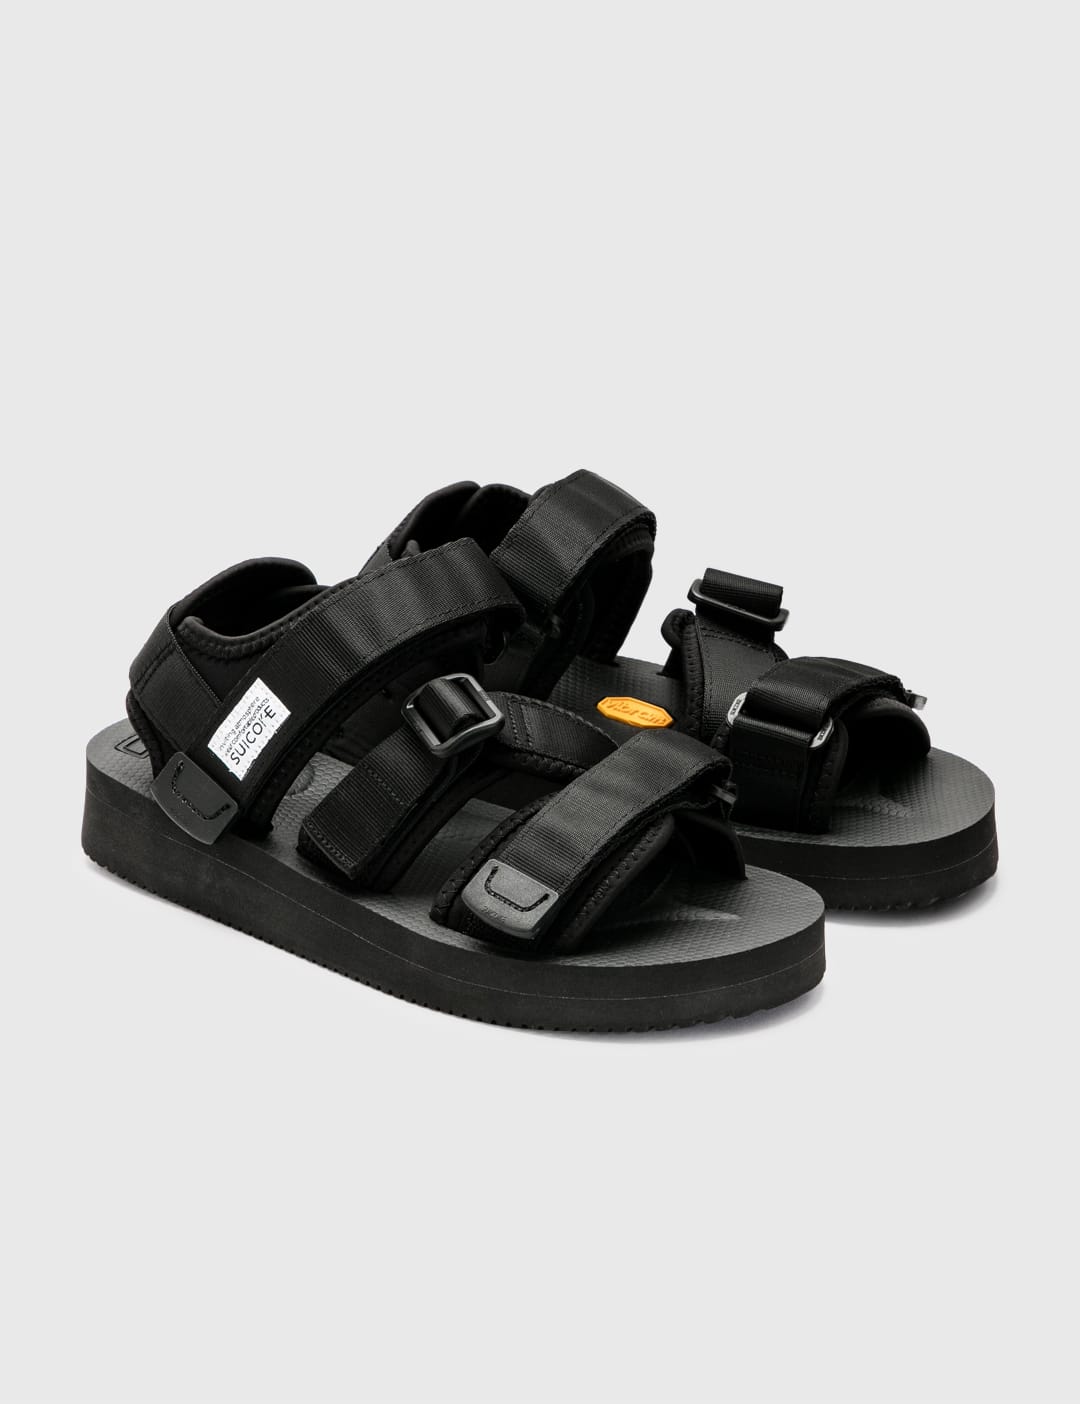 Suicoke - KISEE-V | HBX - Globally Curated Fashion and Lifestyle 